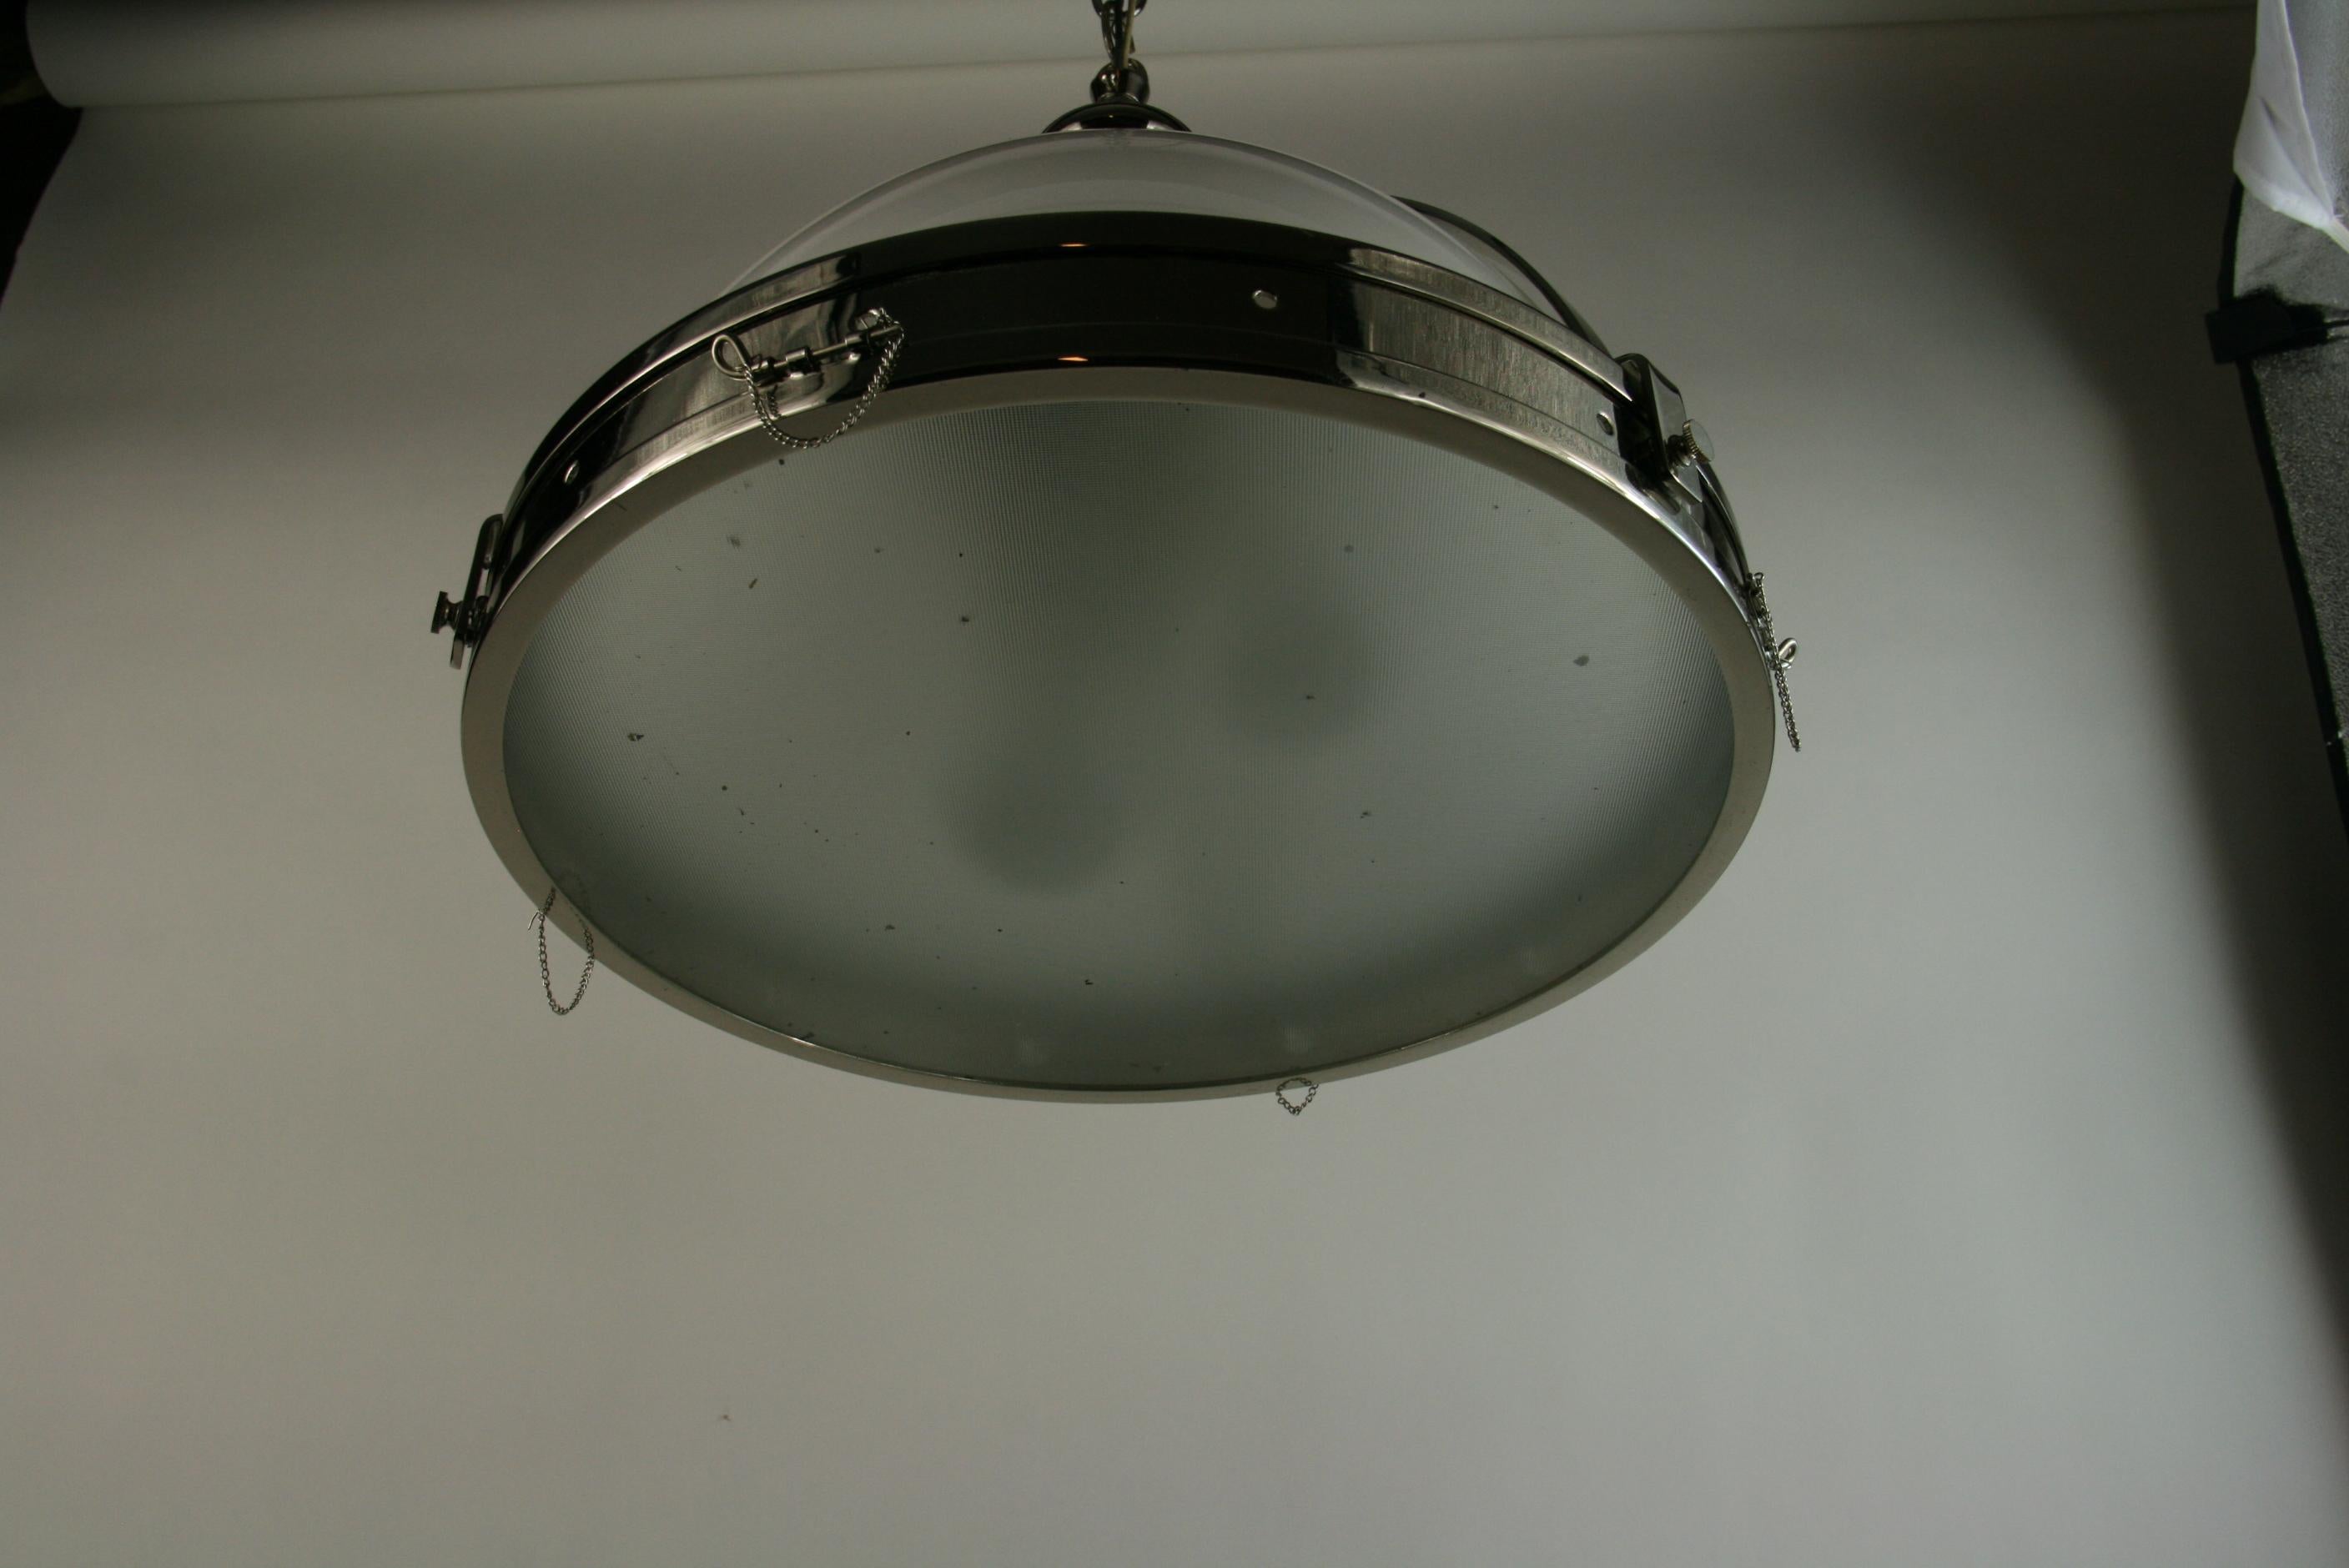 8-210 Opaline and Frosted glass bottom pendant  with chrome banding

2 internal lights
Takes 2 40 watt Edison based bulbs
